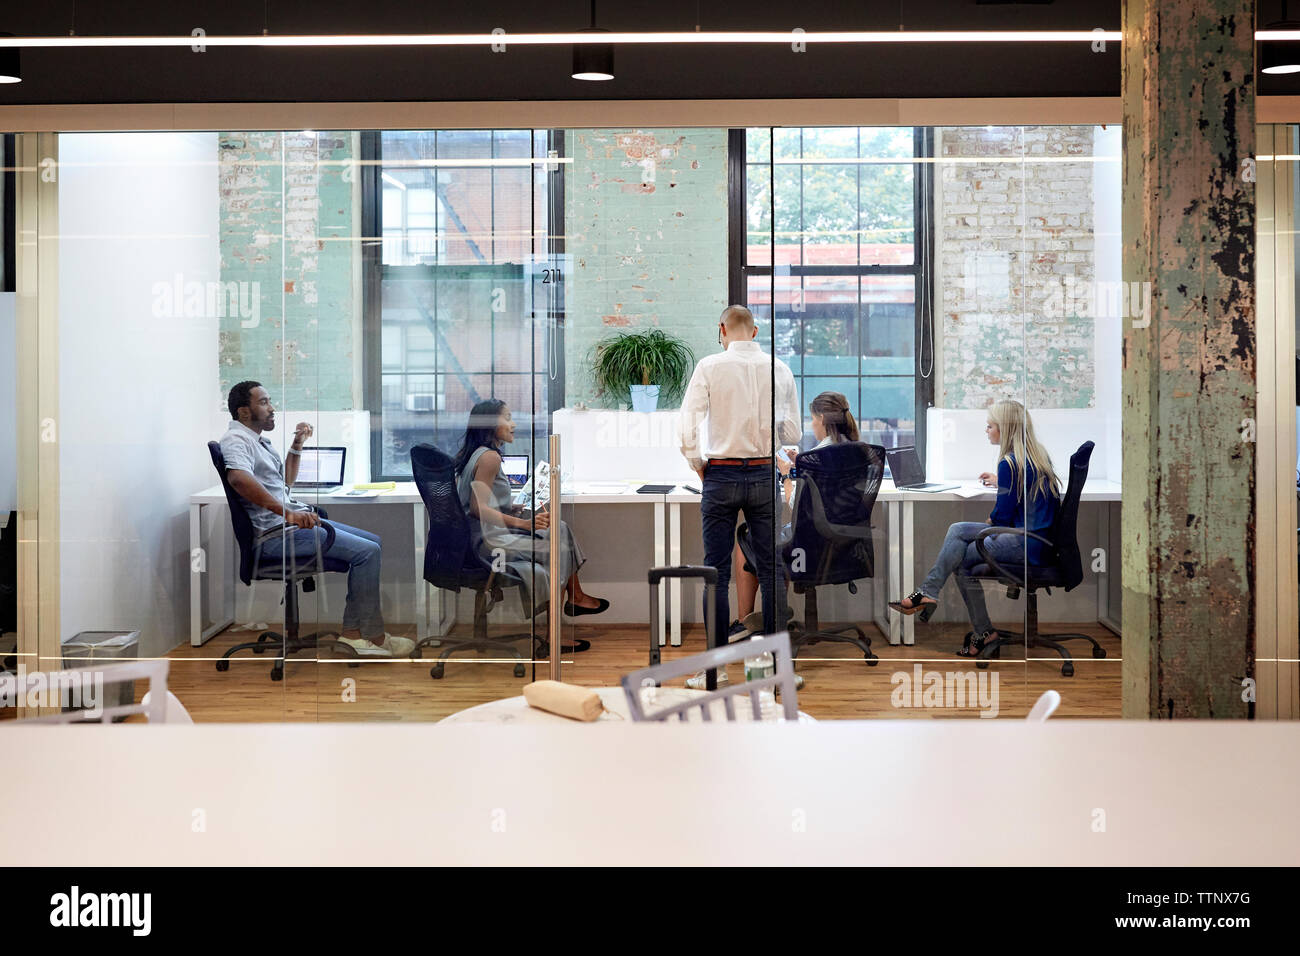 Business people working in office seen through glass wall Stock Photo